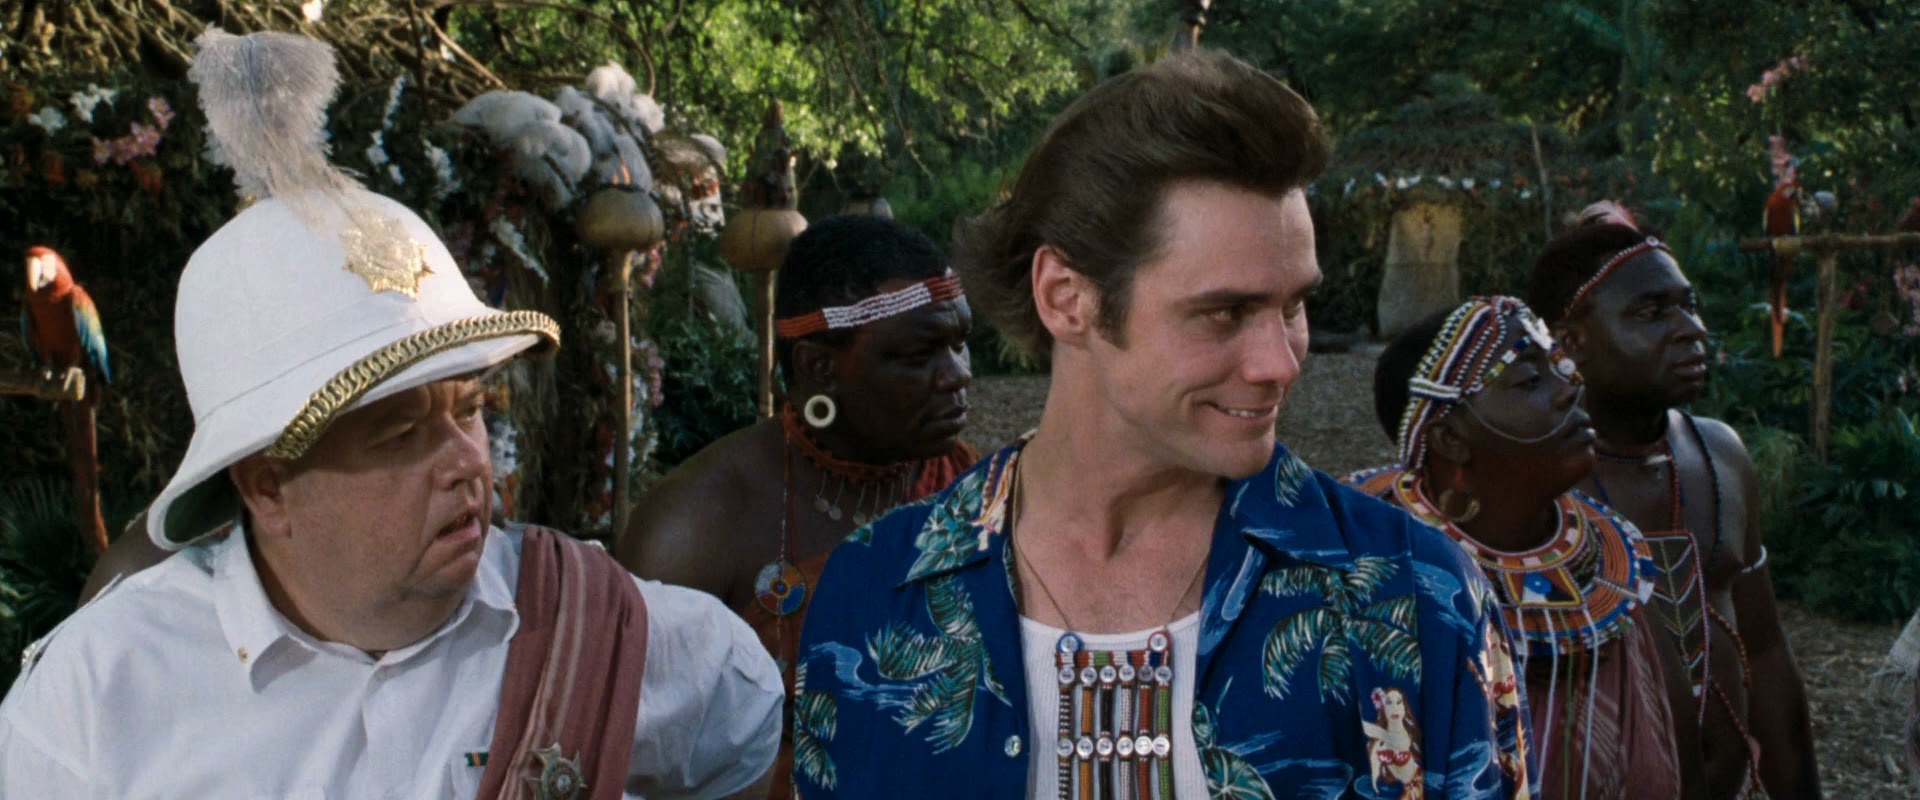 Watch Free Movies 1080.onl: Ace Ventura: When Nature Calls